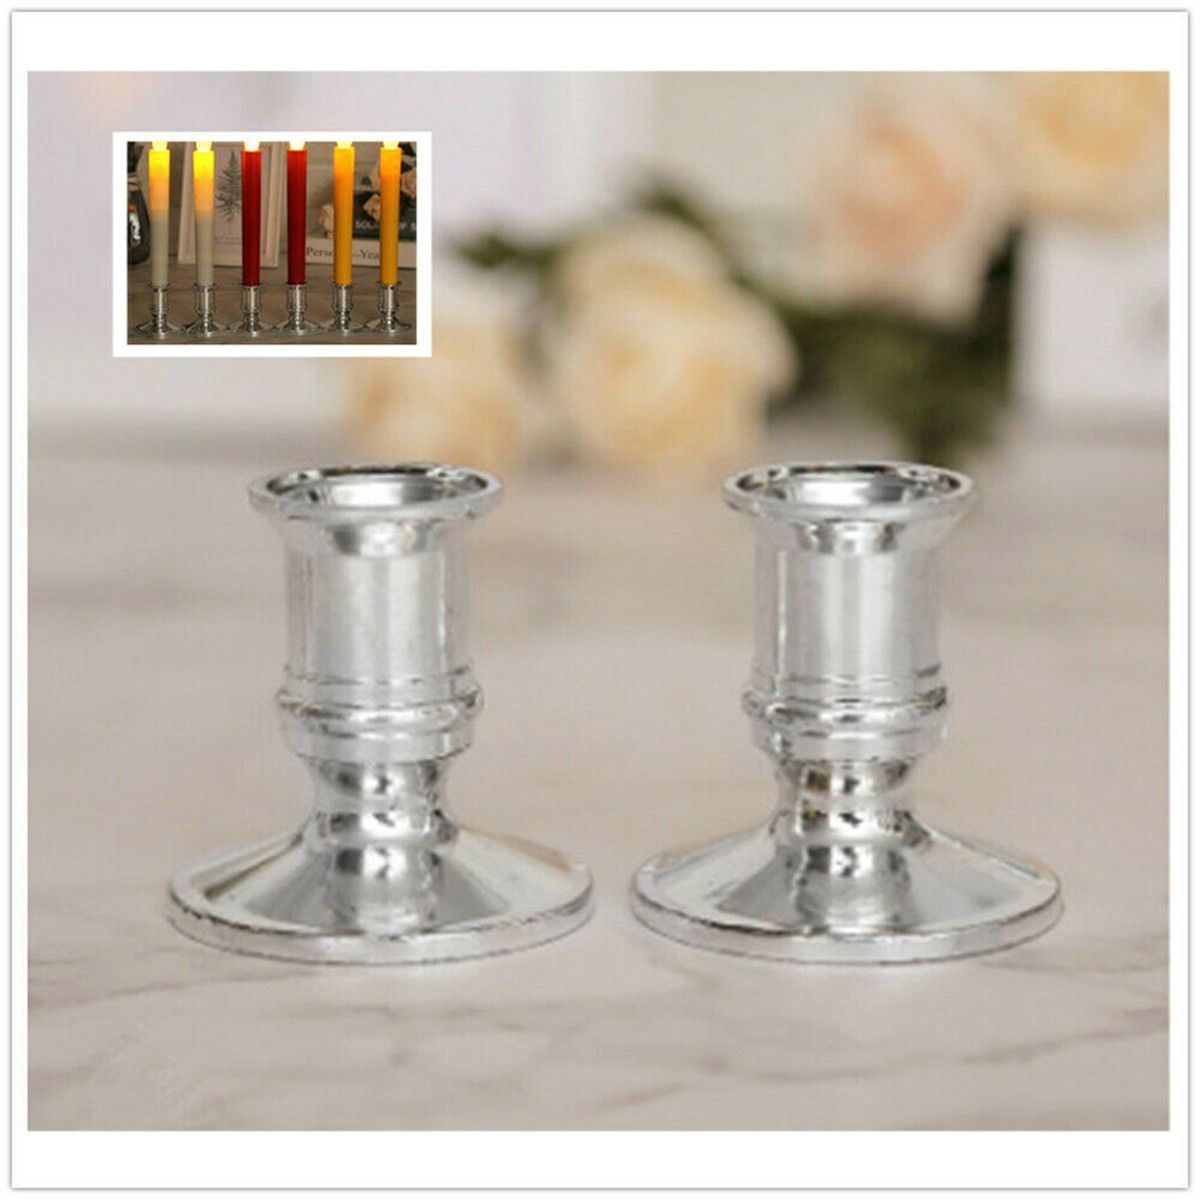 2pcs Candle Base Candle Holders Fits Standard Candlestick Plastic Taper Portable 